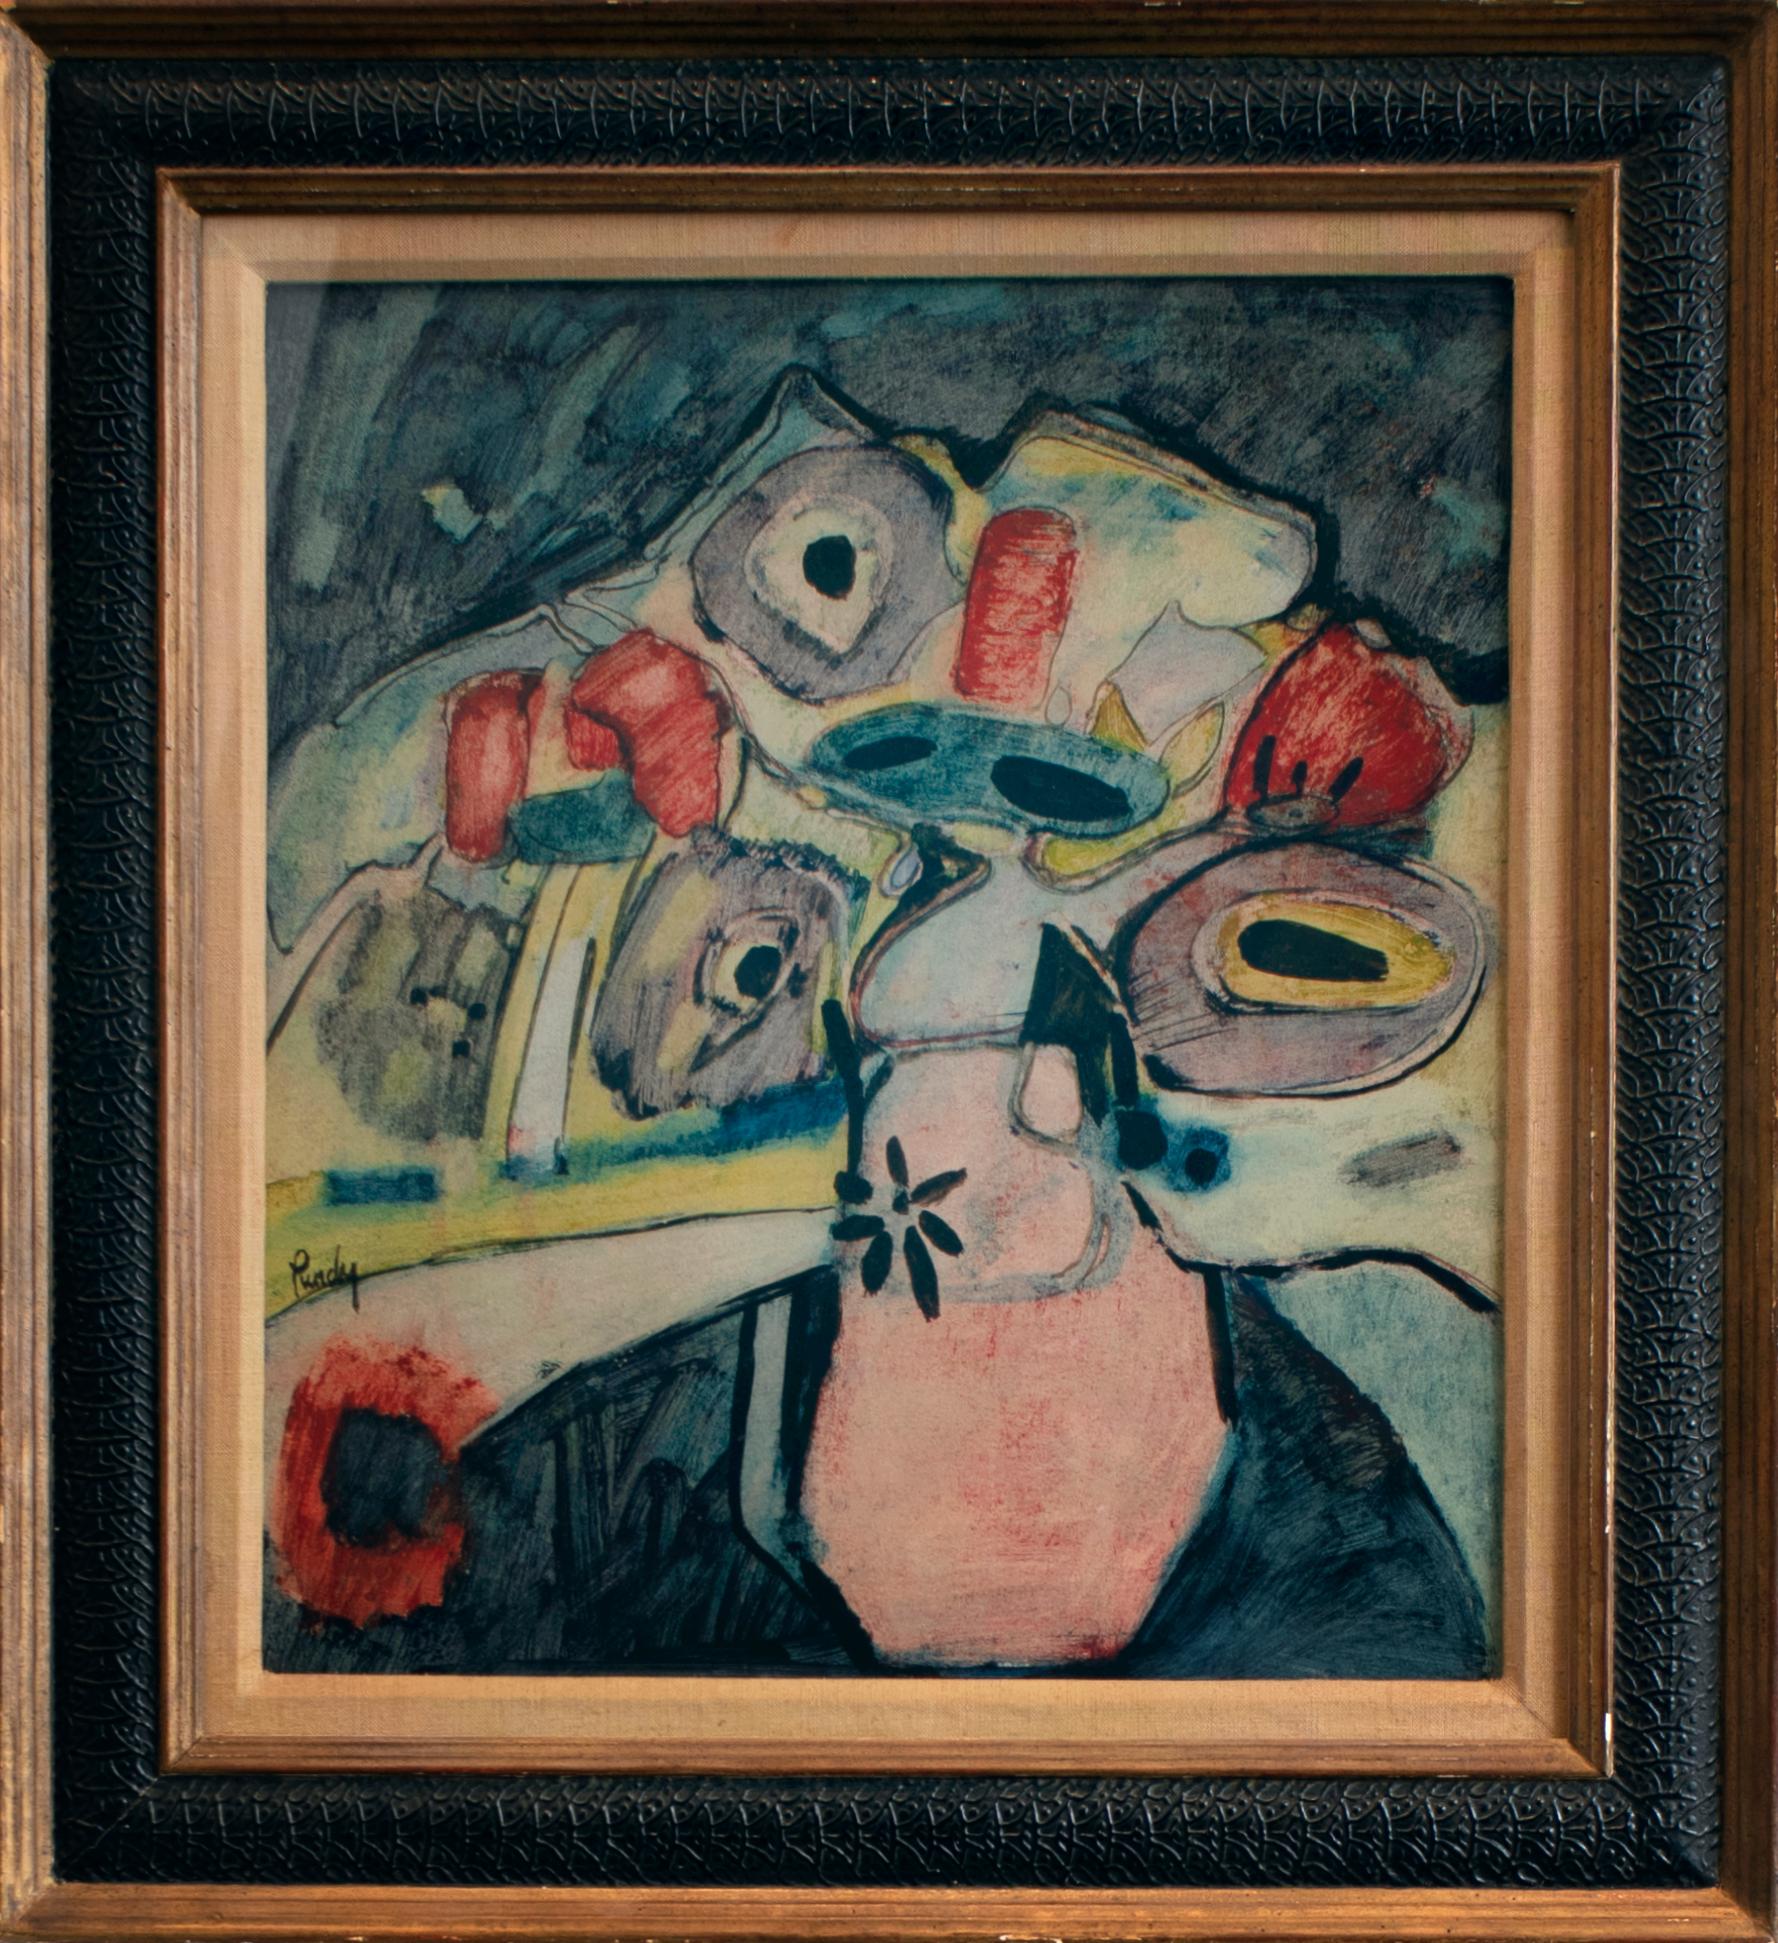 Abstract portrait with antique frame, 1950s/60s